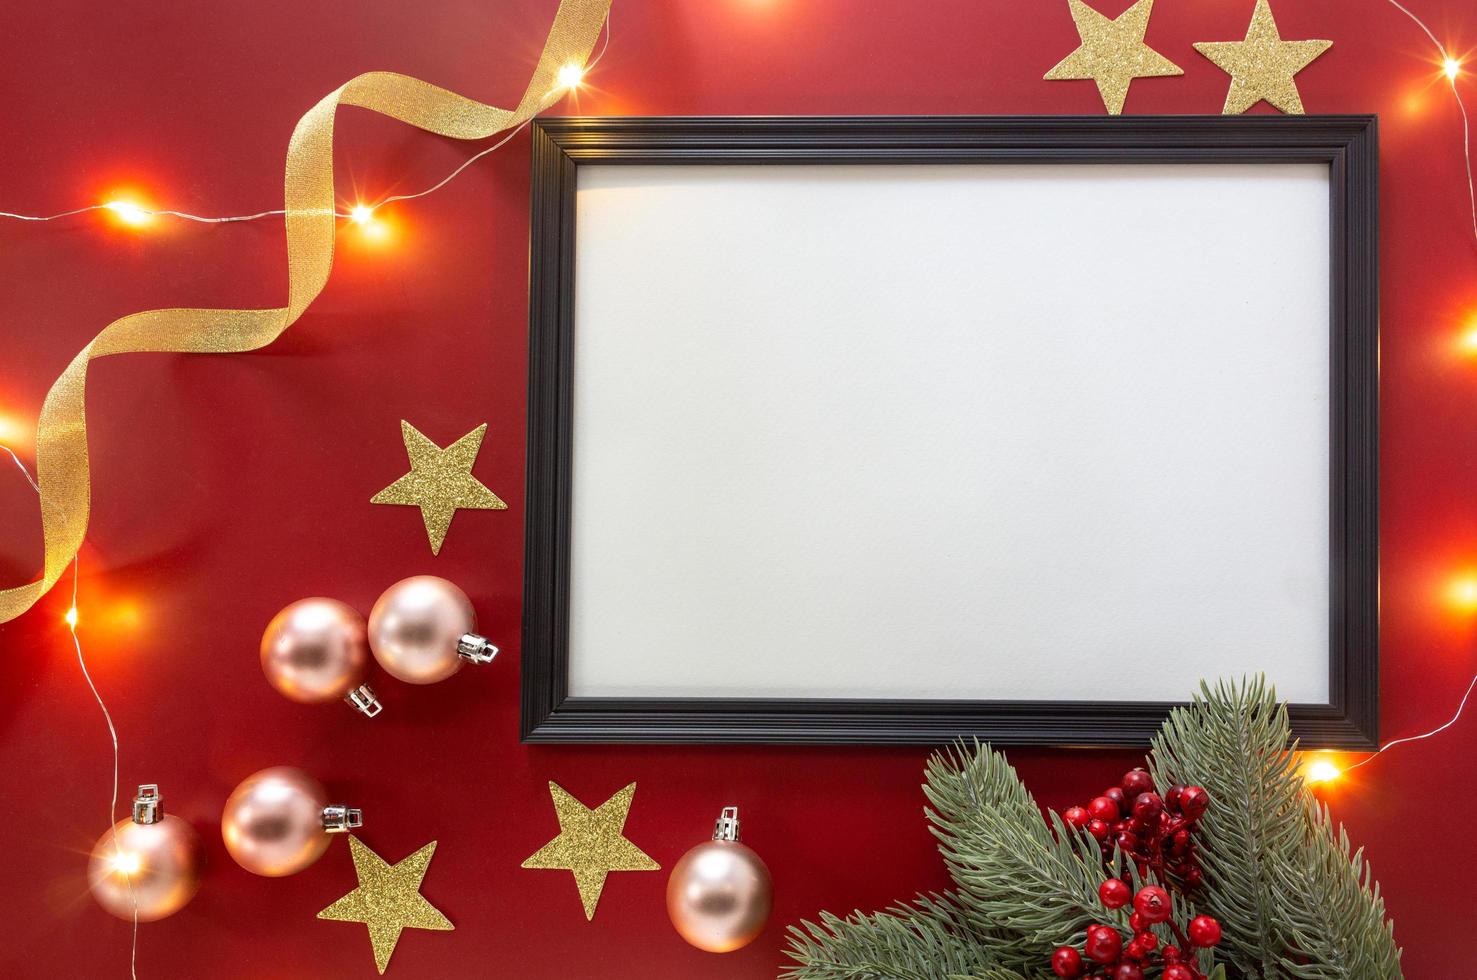 Christmas background with frame mockup, glittering stars, gold ribbon and ornaments on red background. photo